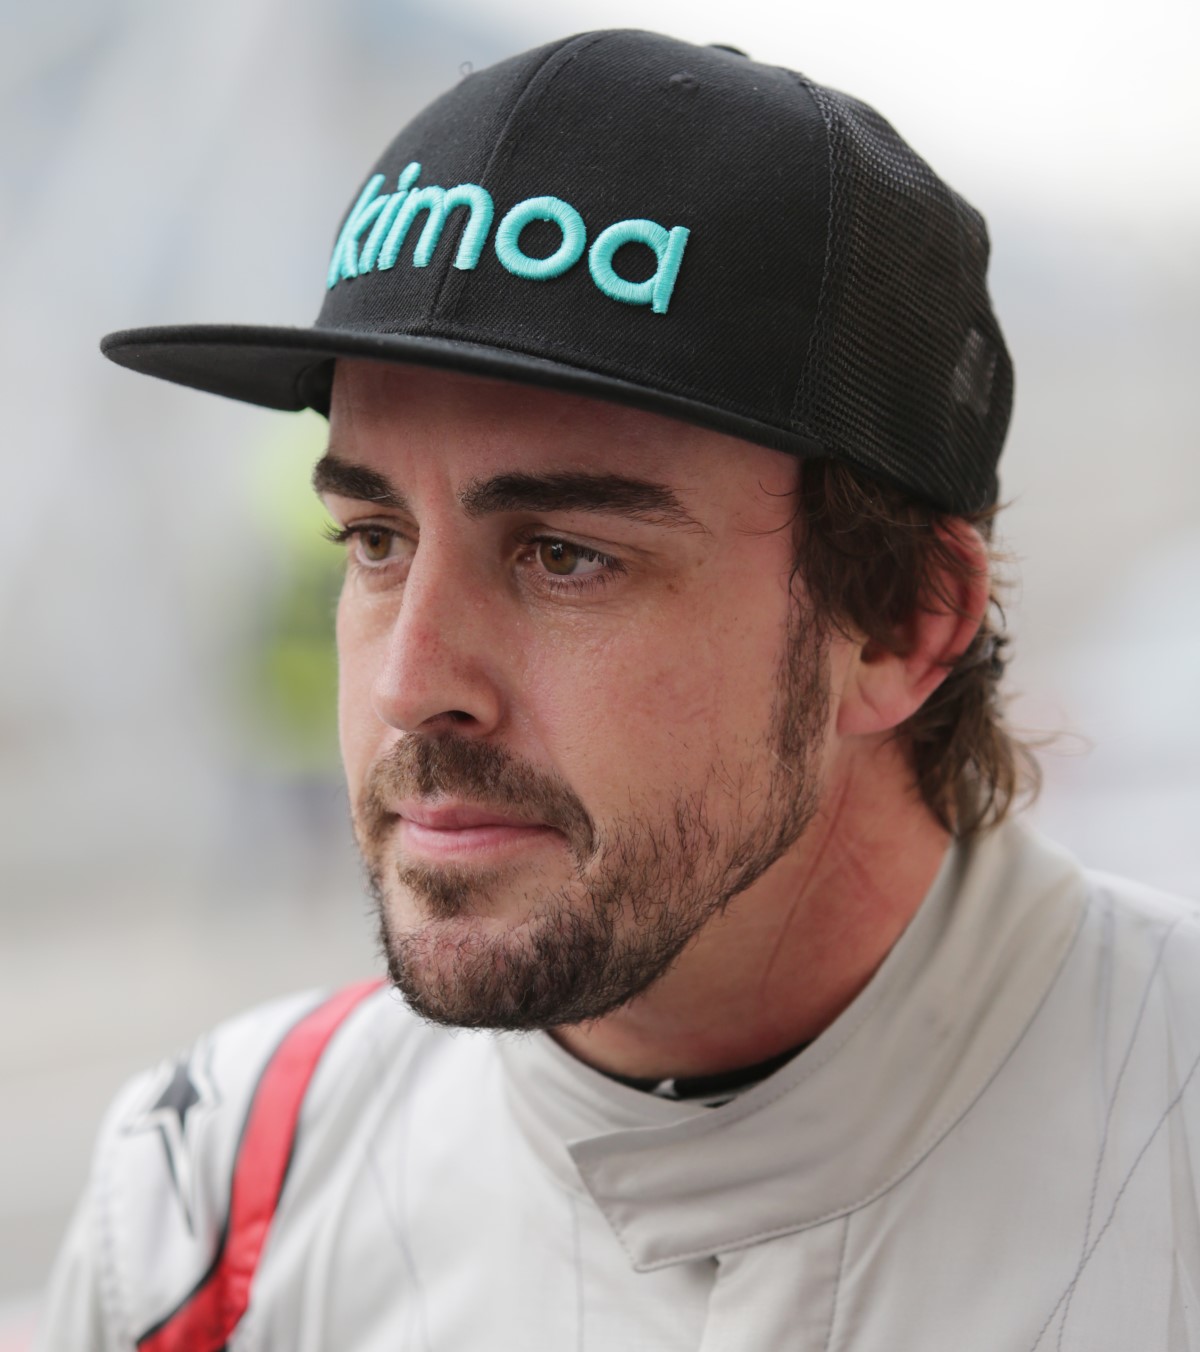 Carey needs some good news for F1 and Alonso's success could be one opportunity